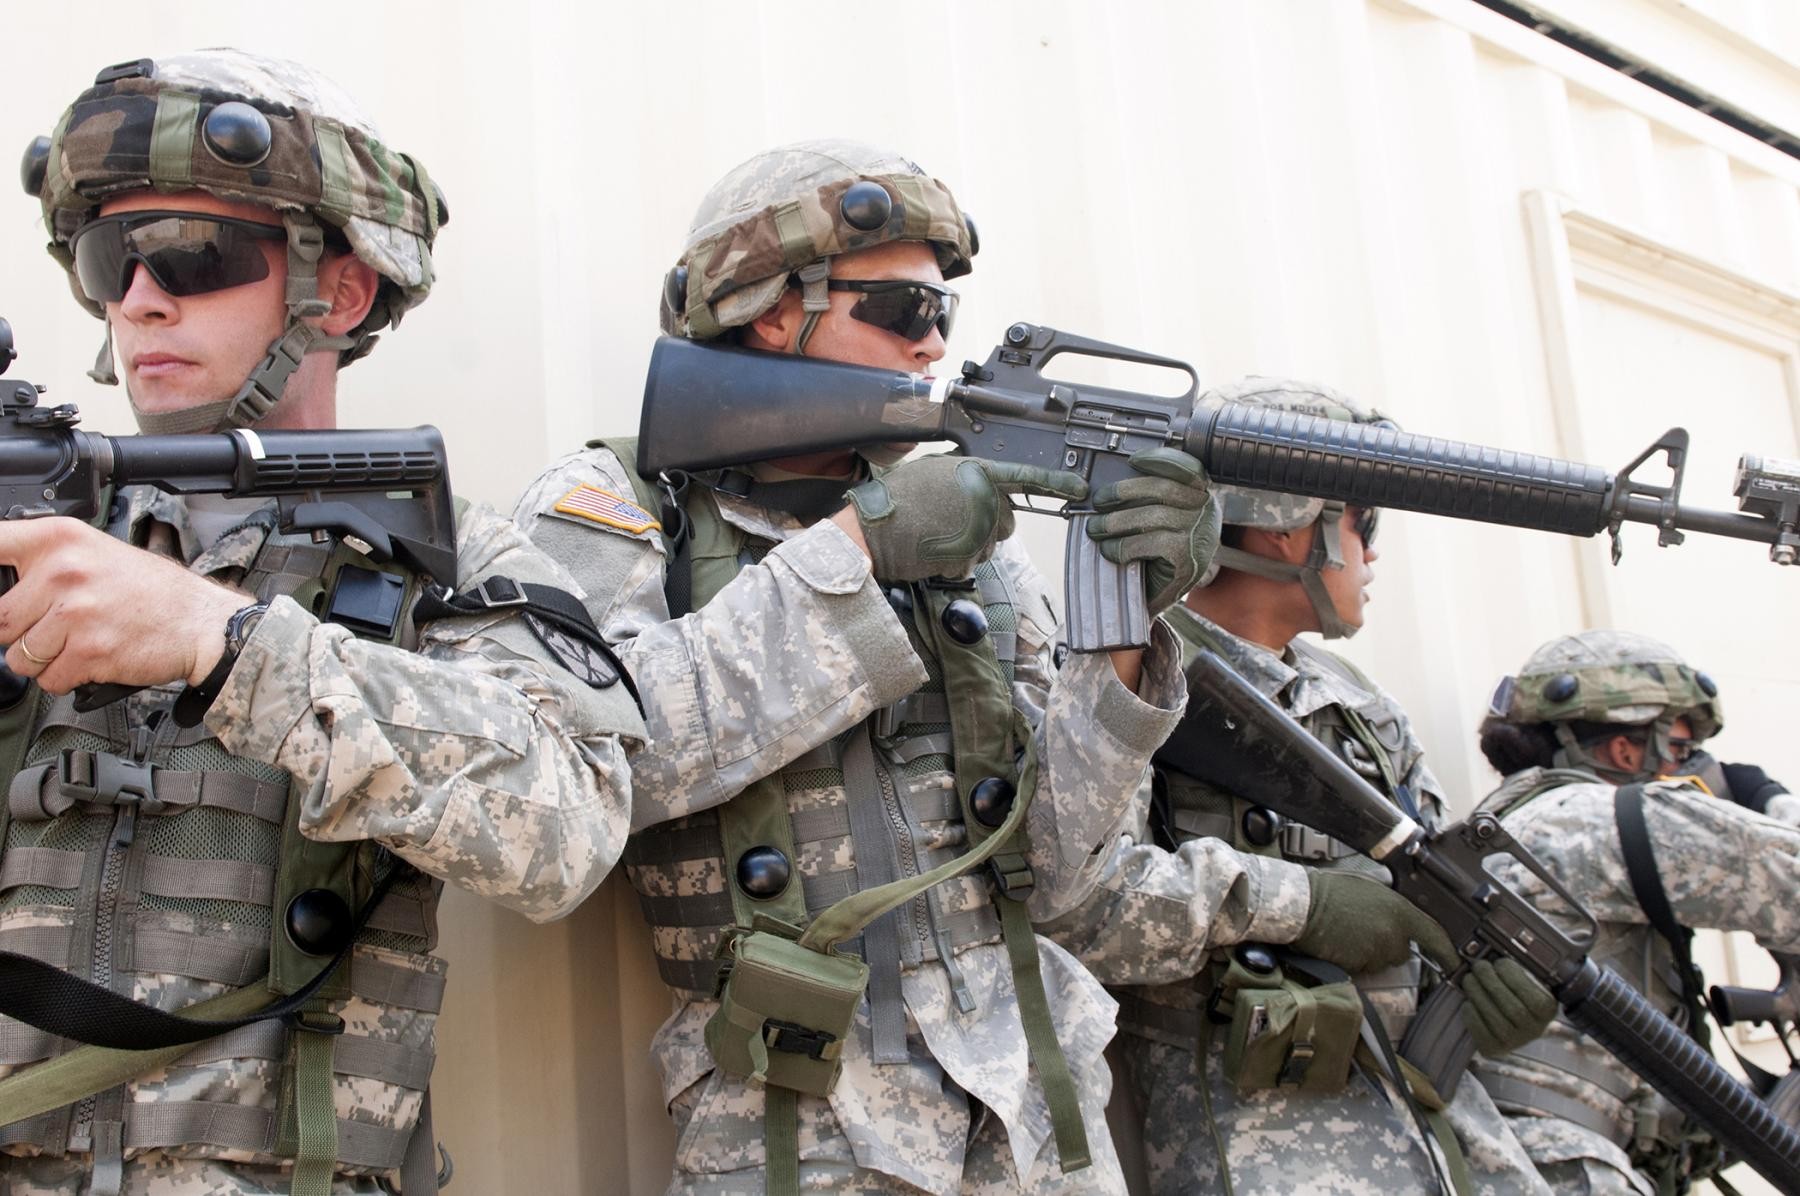 593rd ESC conducts urban terrain training Article The United States